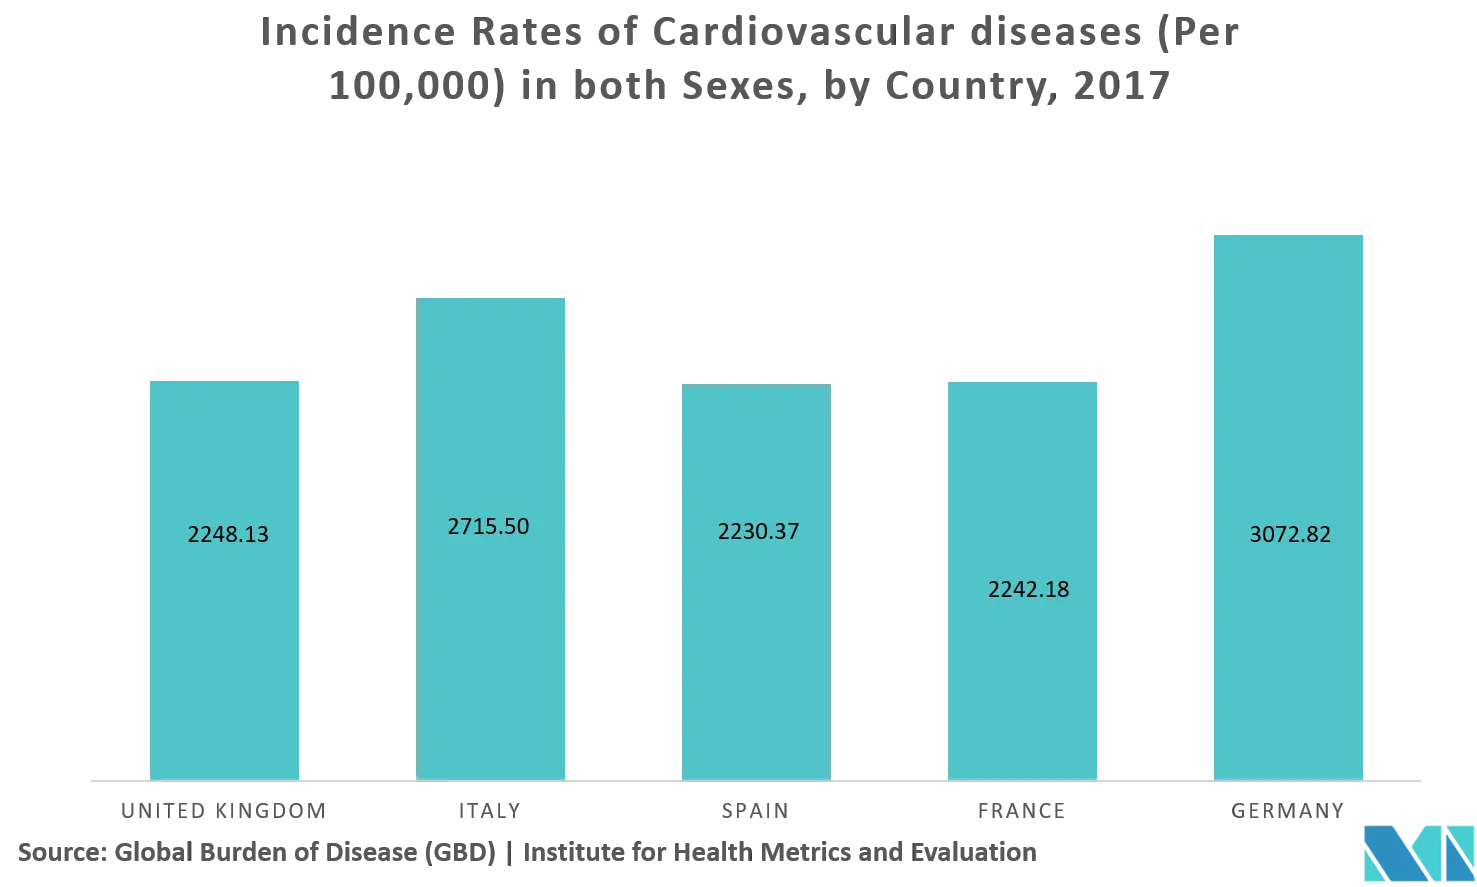 Europe Cardiac Rhythm Management Devices Market: Incidence Rates of Cardiovascular diseases (Per 100,000) in both Sexes, by Country, 2017